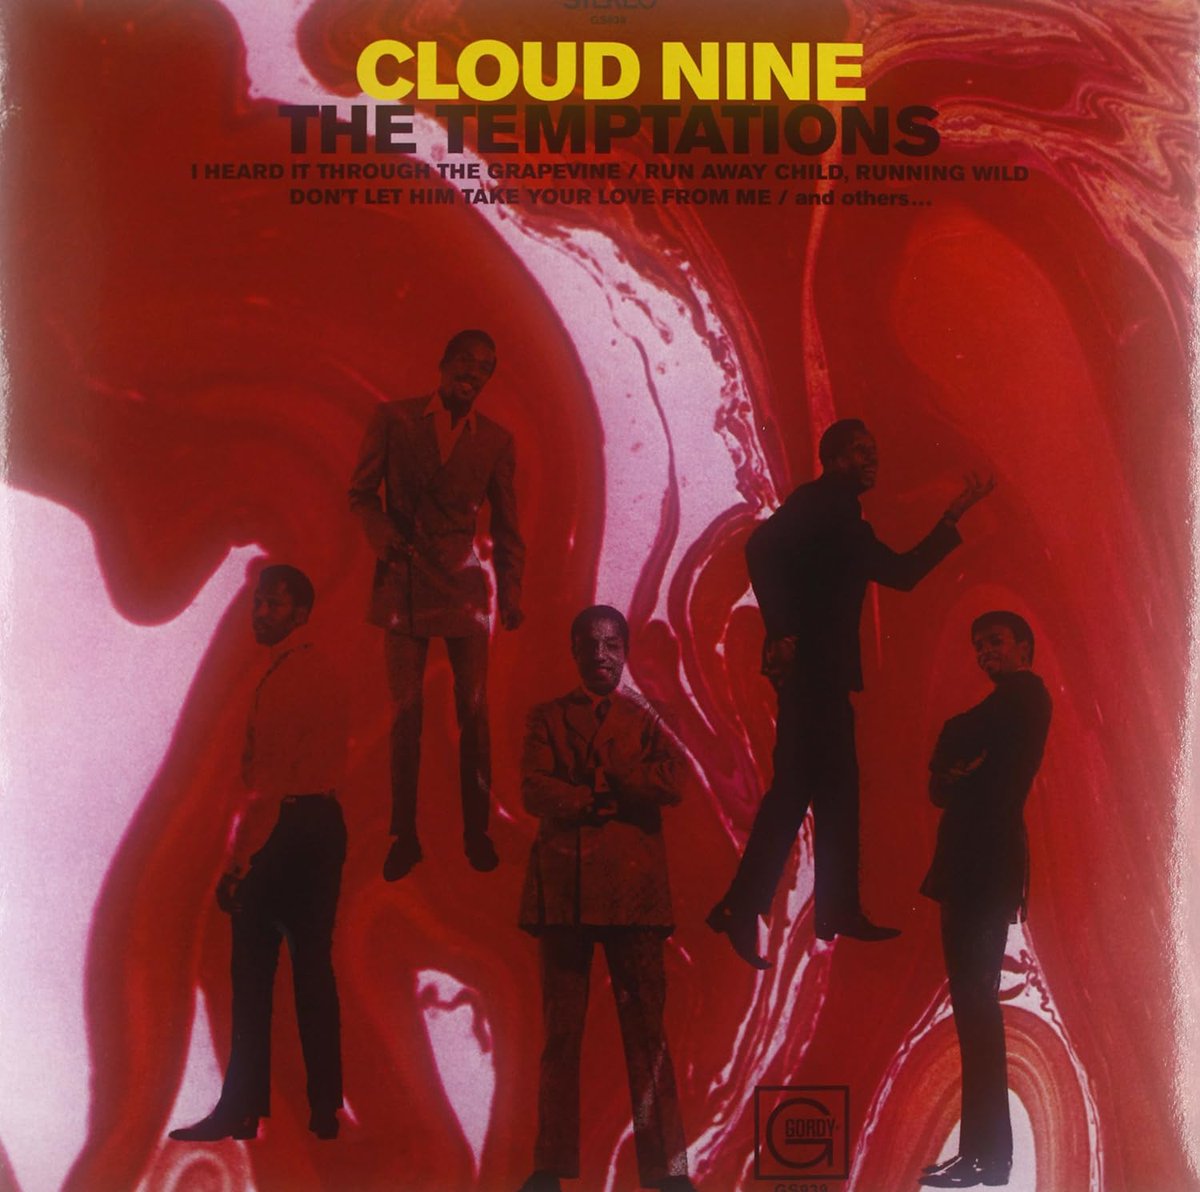 The Temptations - Cloud Nine, 1969 Is the ninth studio album by The Temptations. It marked the beginning of the Temptations' delve into psychedelic soul under the direction of producer Norman Whitfield.